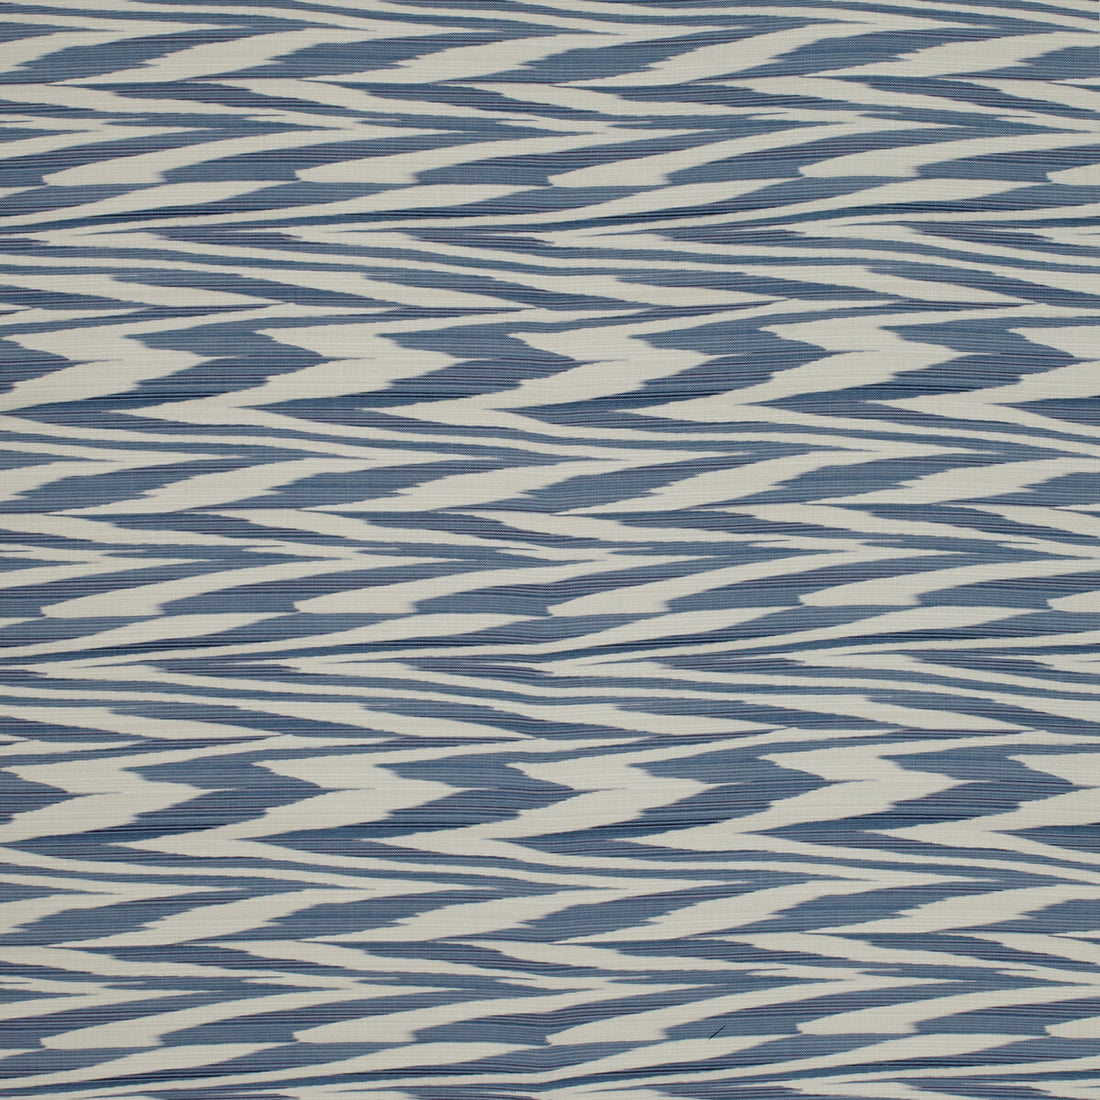 Atacama Outdoor fabric in 221 color - pattern 36156.15.0 - by Kravet Couture in the Missoni Home 2021 collection